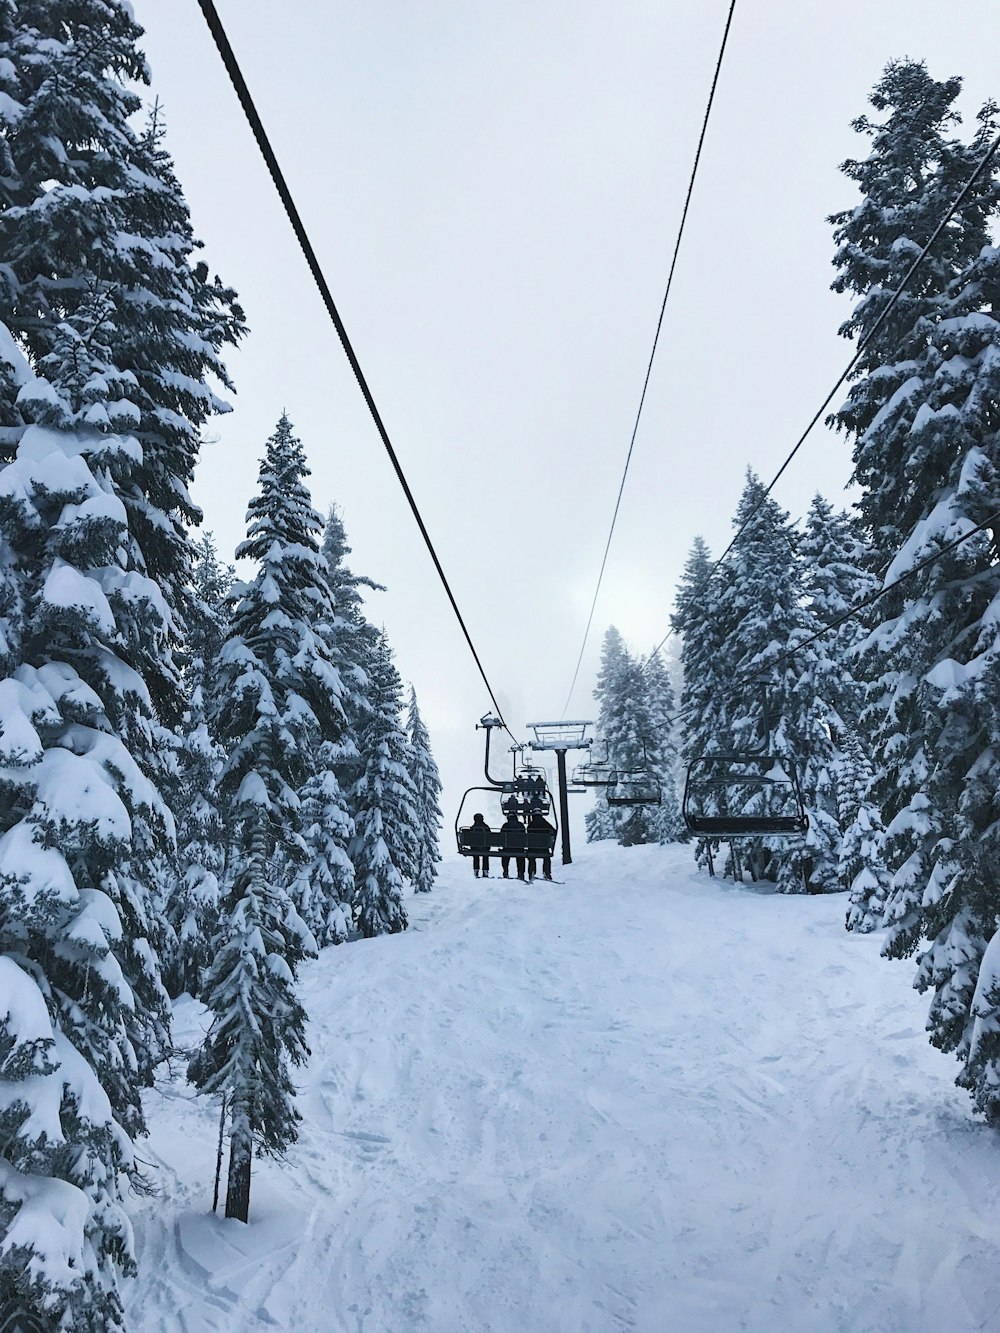 black cable car on snow covered pine trees